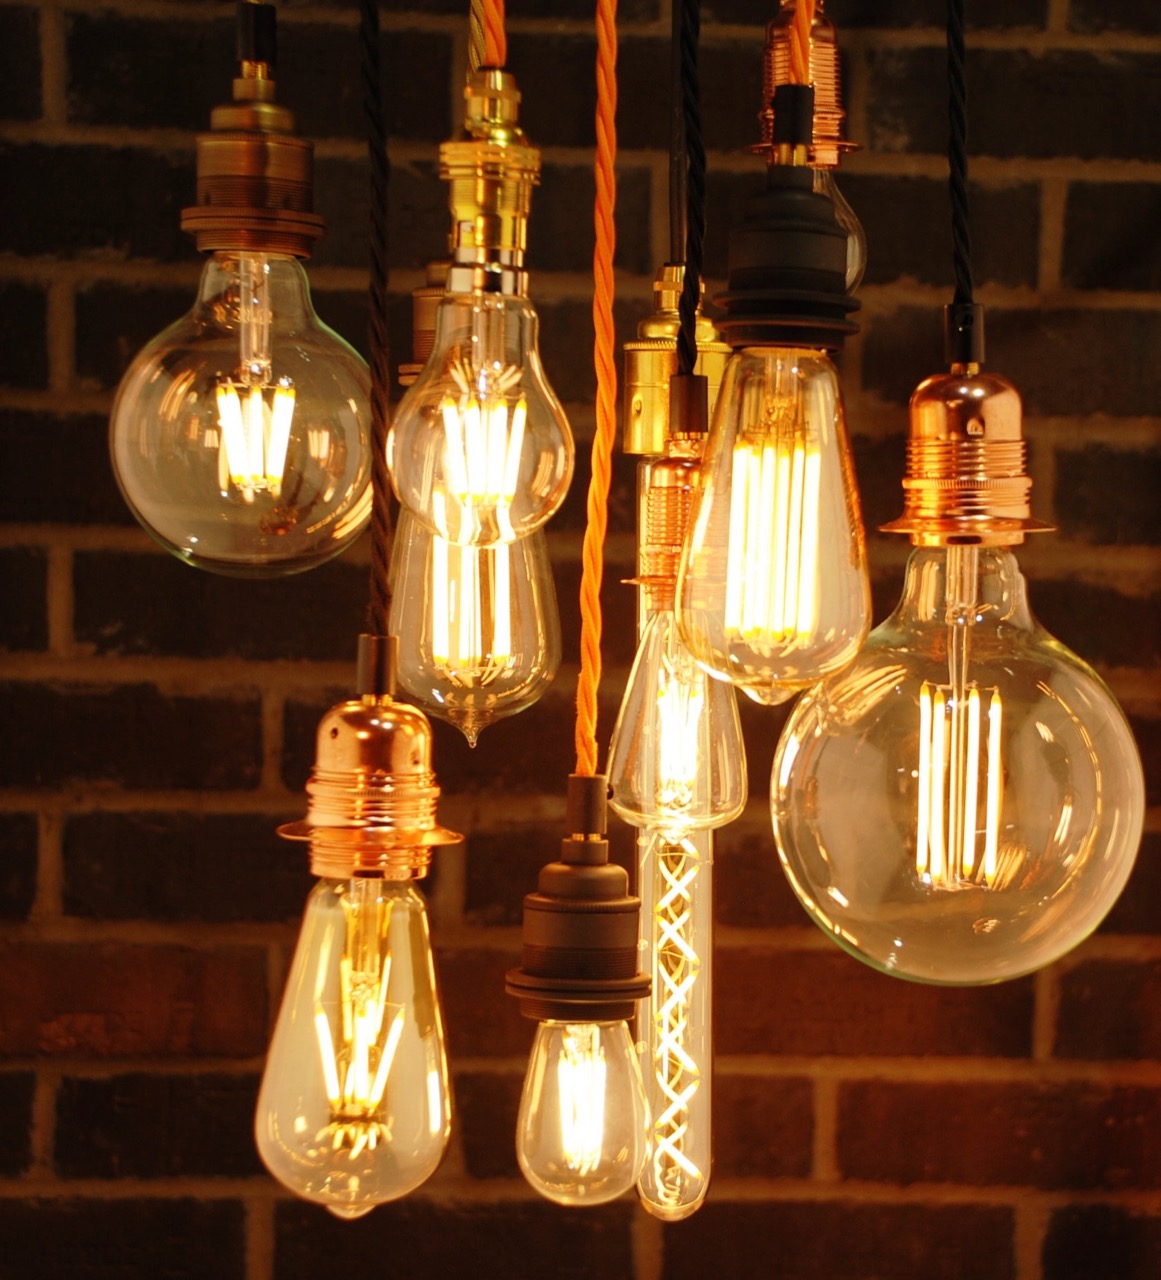 What Is A Light Bulb Filament Made Of